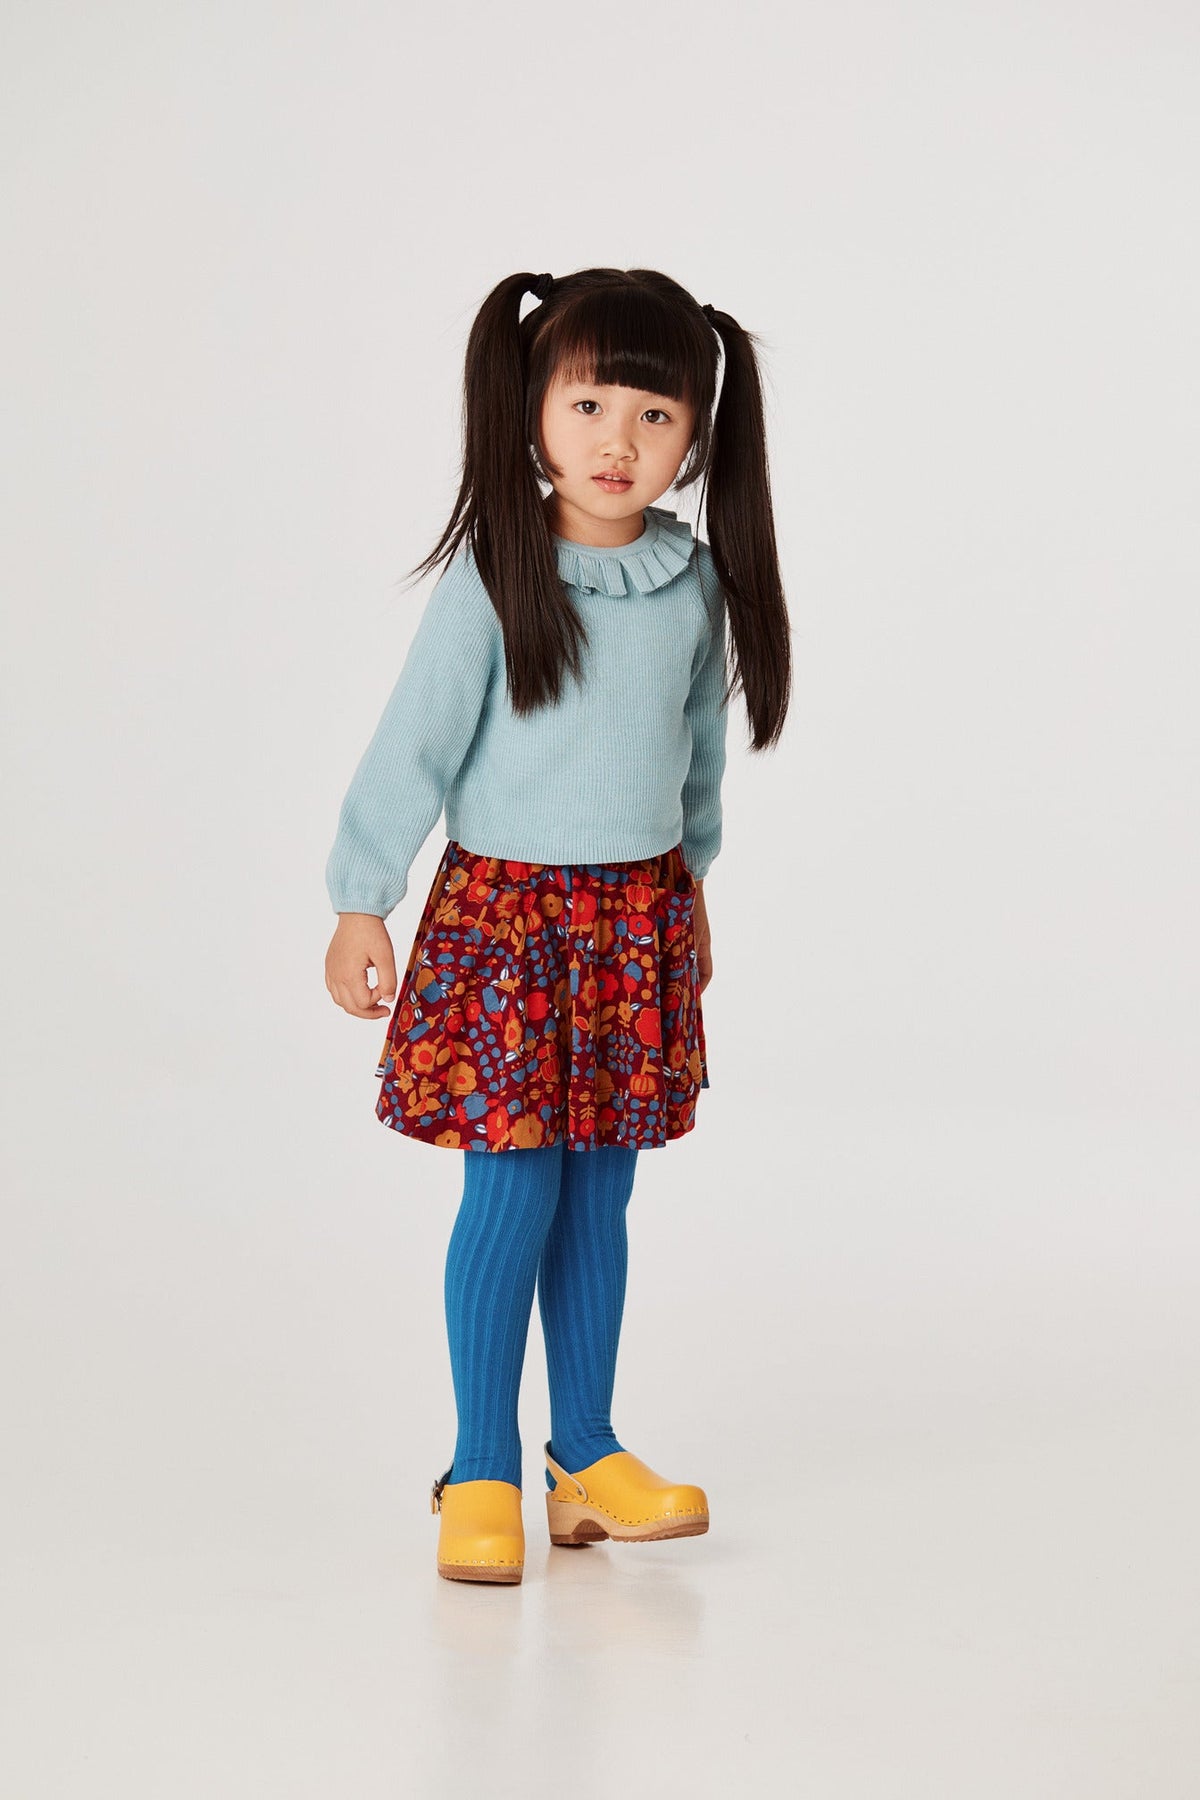 Circle Skirt - Cranberry Playground+Model is 41 inches tall, 38lbs, wearing a size 4-5y